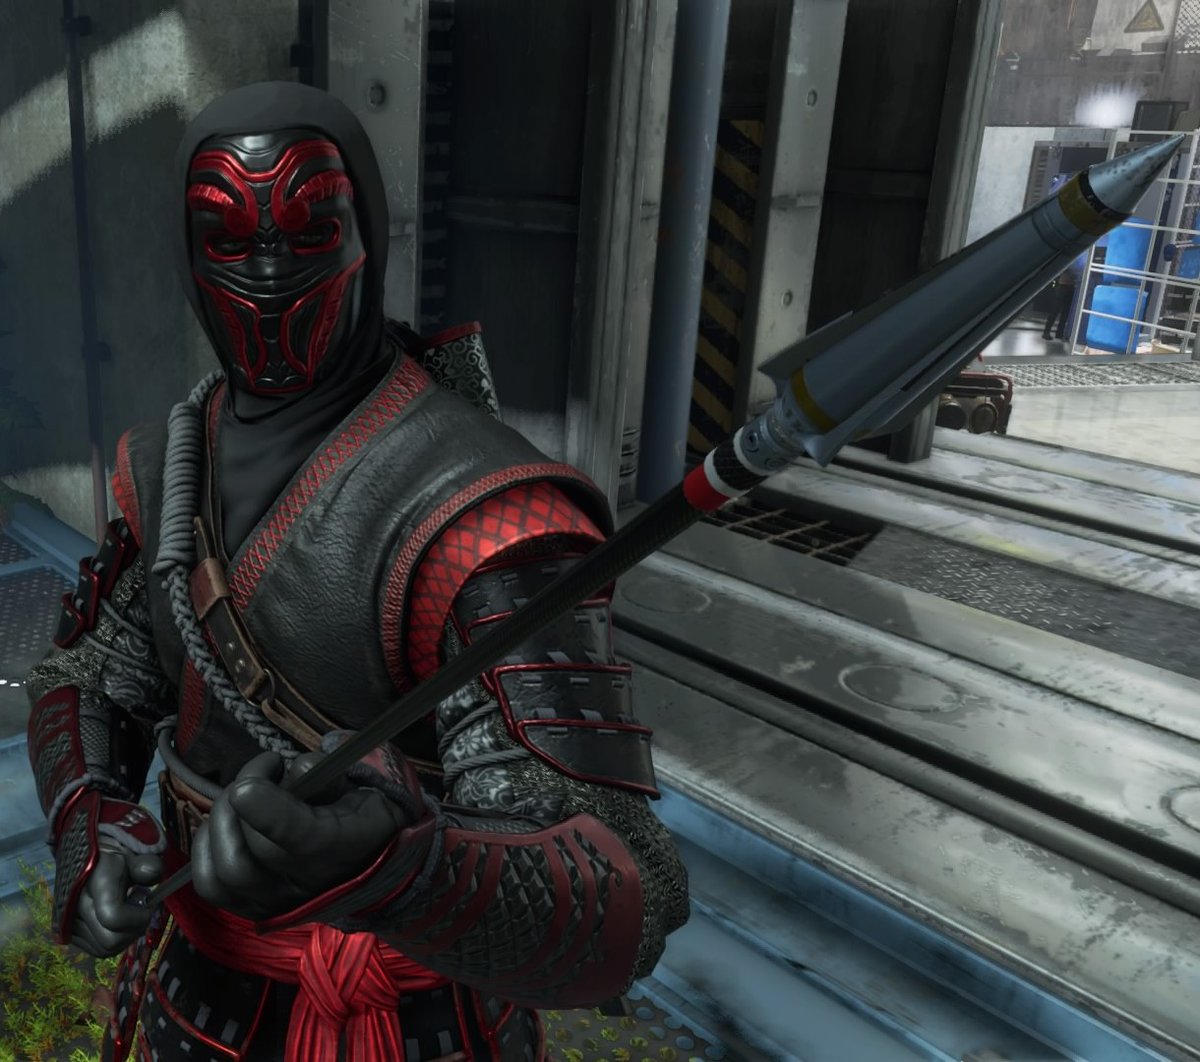 last discover of last night, this guy. Not as cool as Clint in a plain white t-shirt. Red and Black Ronin in full detail.